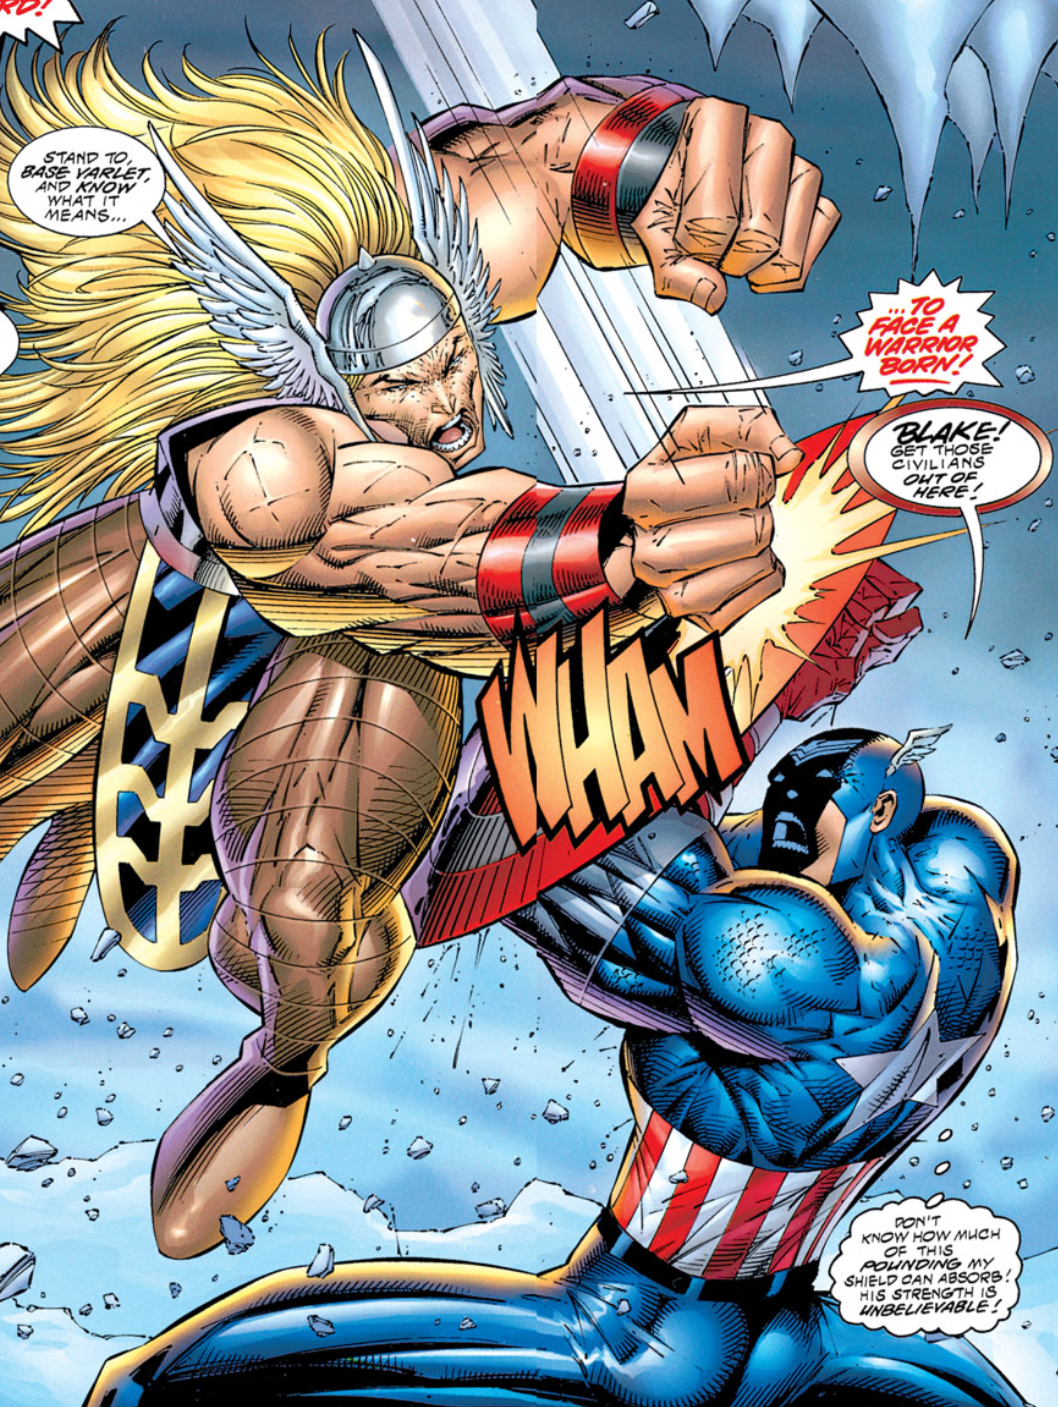 They got paid for this! — Avengers v2 #1 art by Rob Liefeld & Chap ...